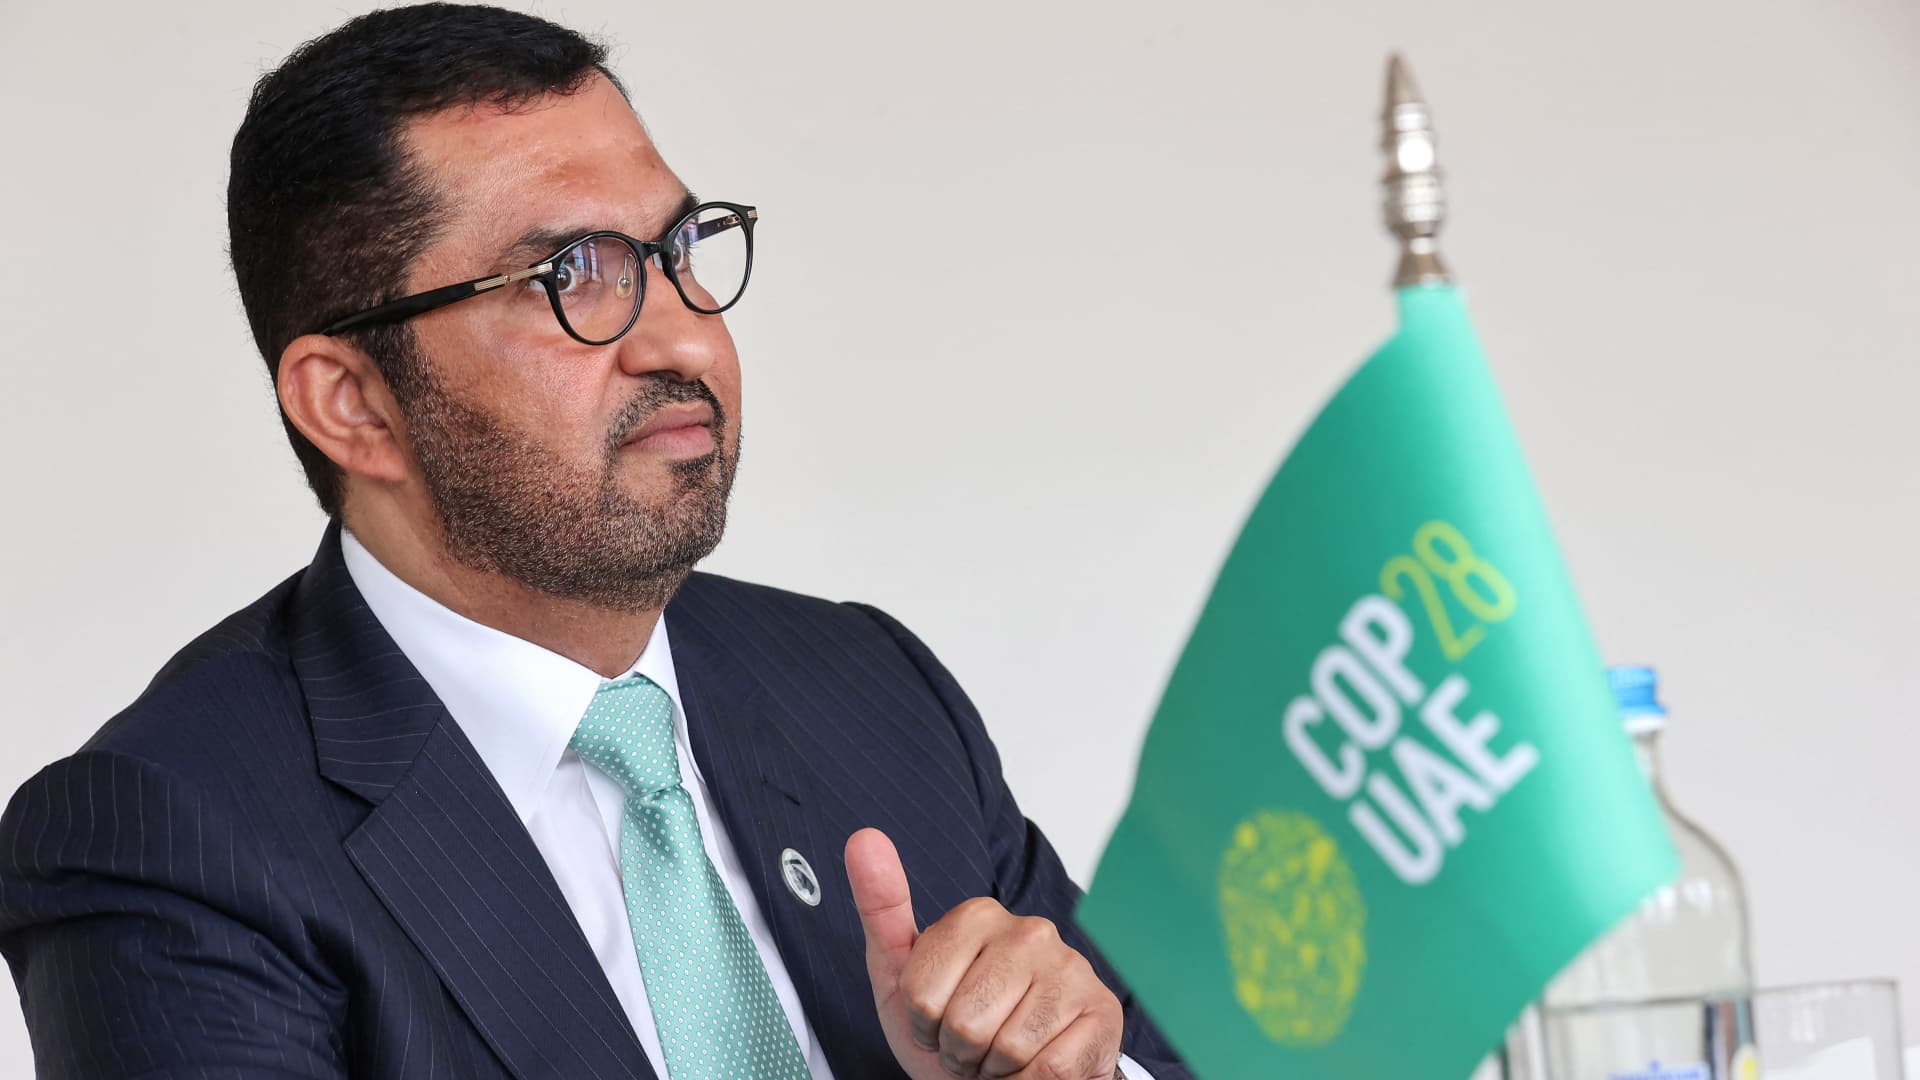 Sultan Al Jaber, chief executive of the UAE's Abu Dhabi National Oil Company (ADNOC) and president of this year's COP28 climate summit gestures during an interview as part of the 7th Ministerial on Climate Action (MoCA) in Brussels on July 13, 2023.